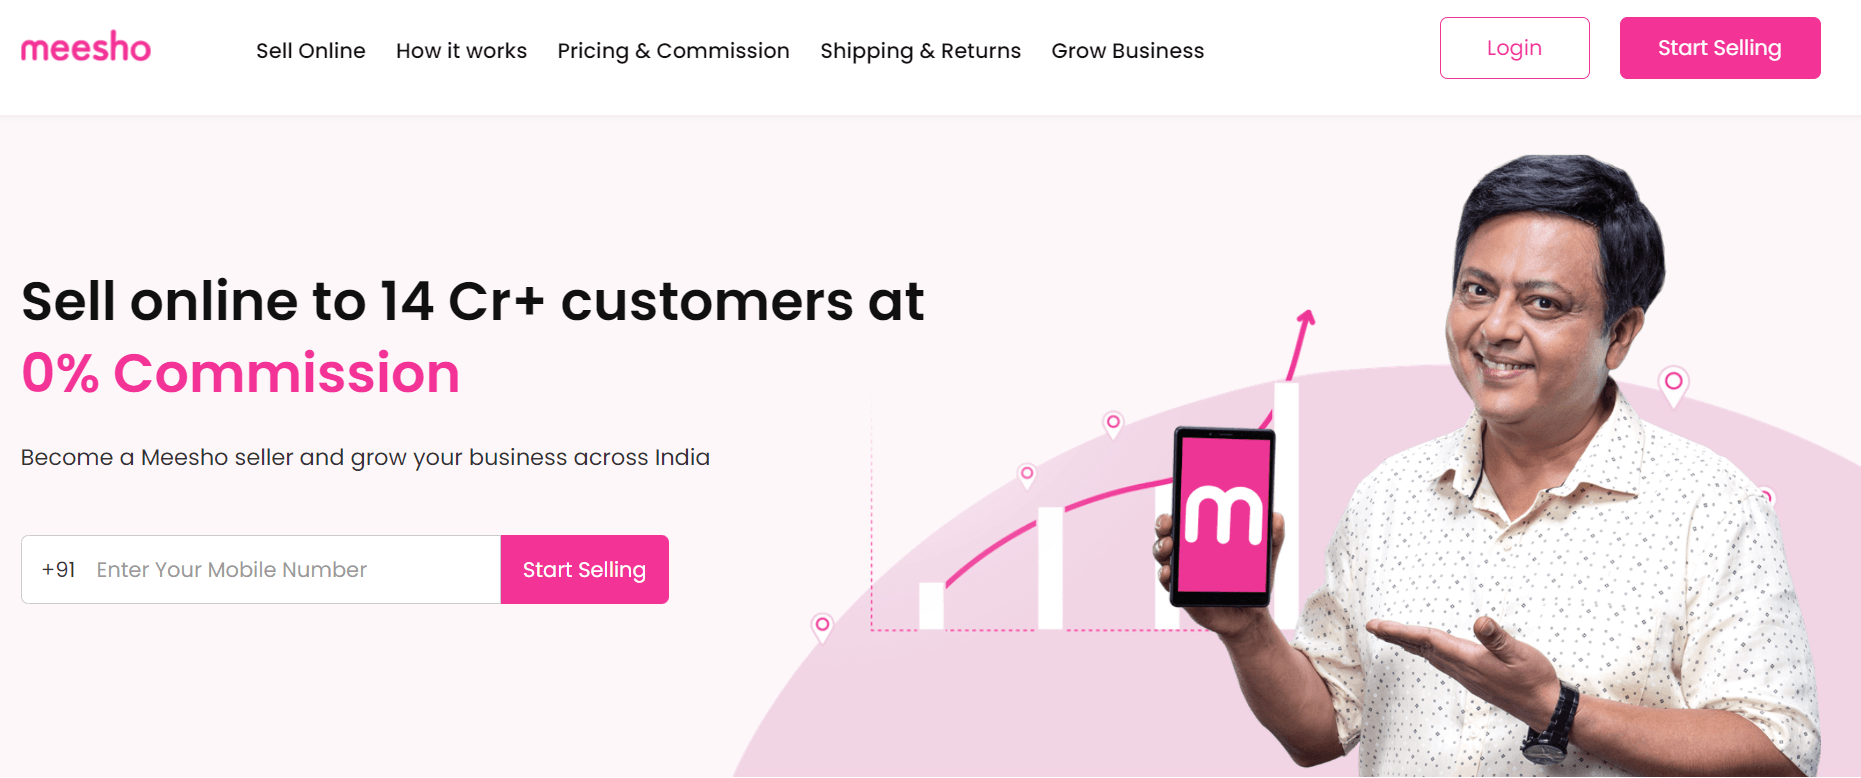 Meesho - trusted online earning sites #9